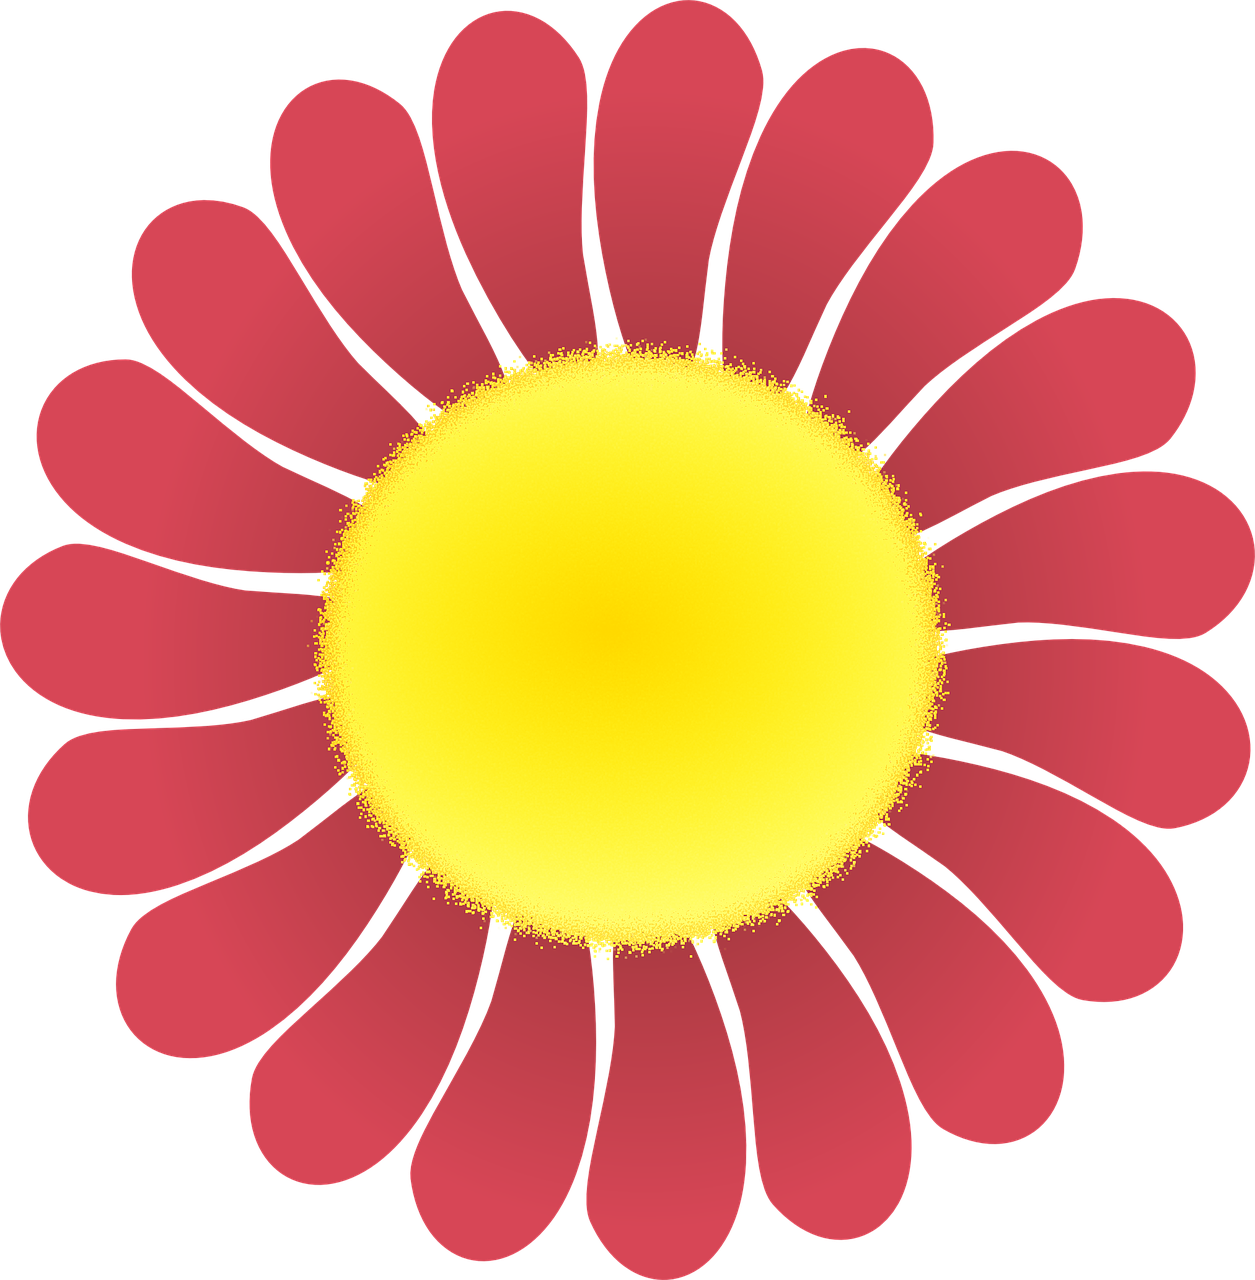 Flower Red Flower Vector Png Image - Reporting Framework (1255x1280)